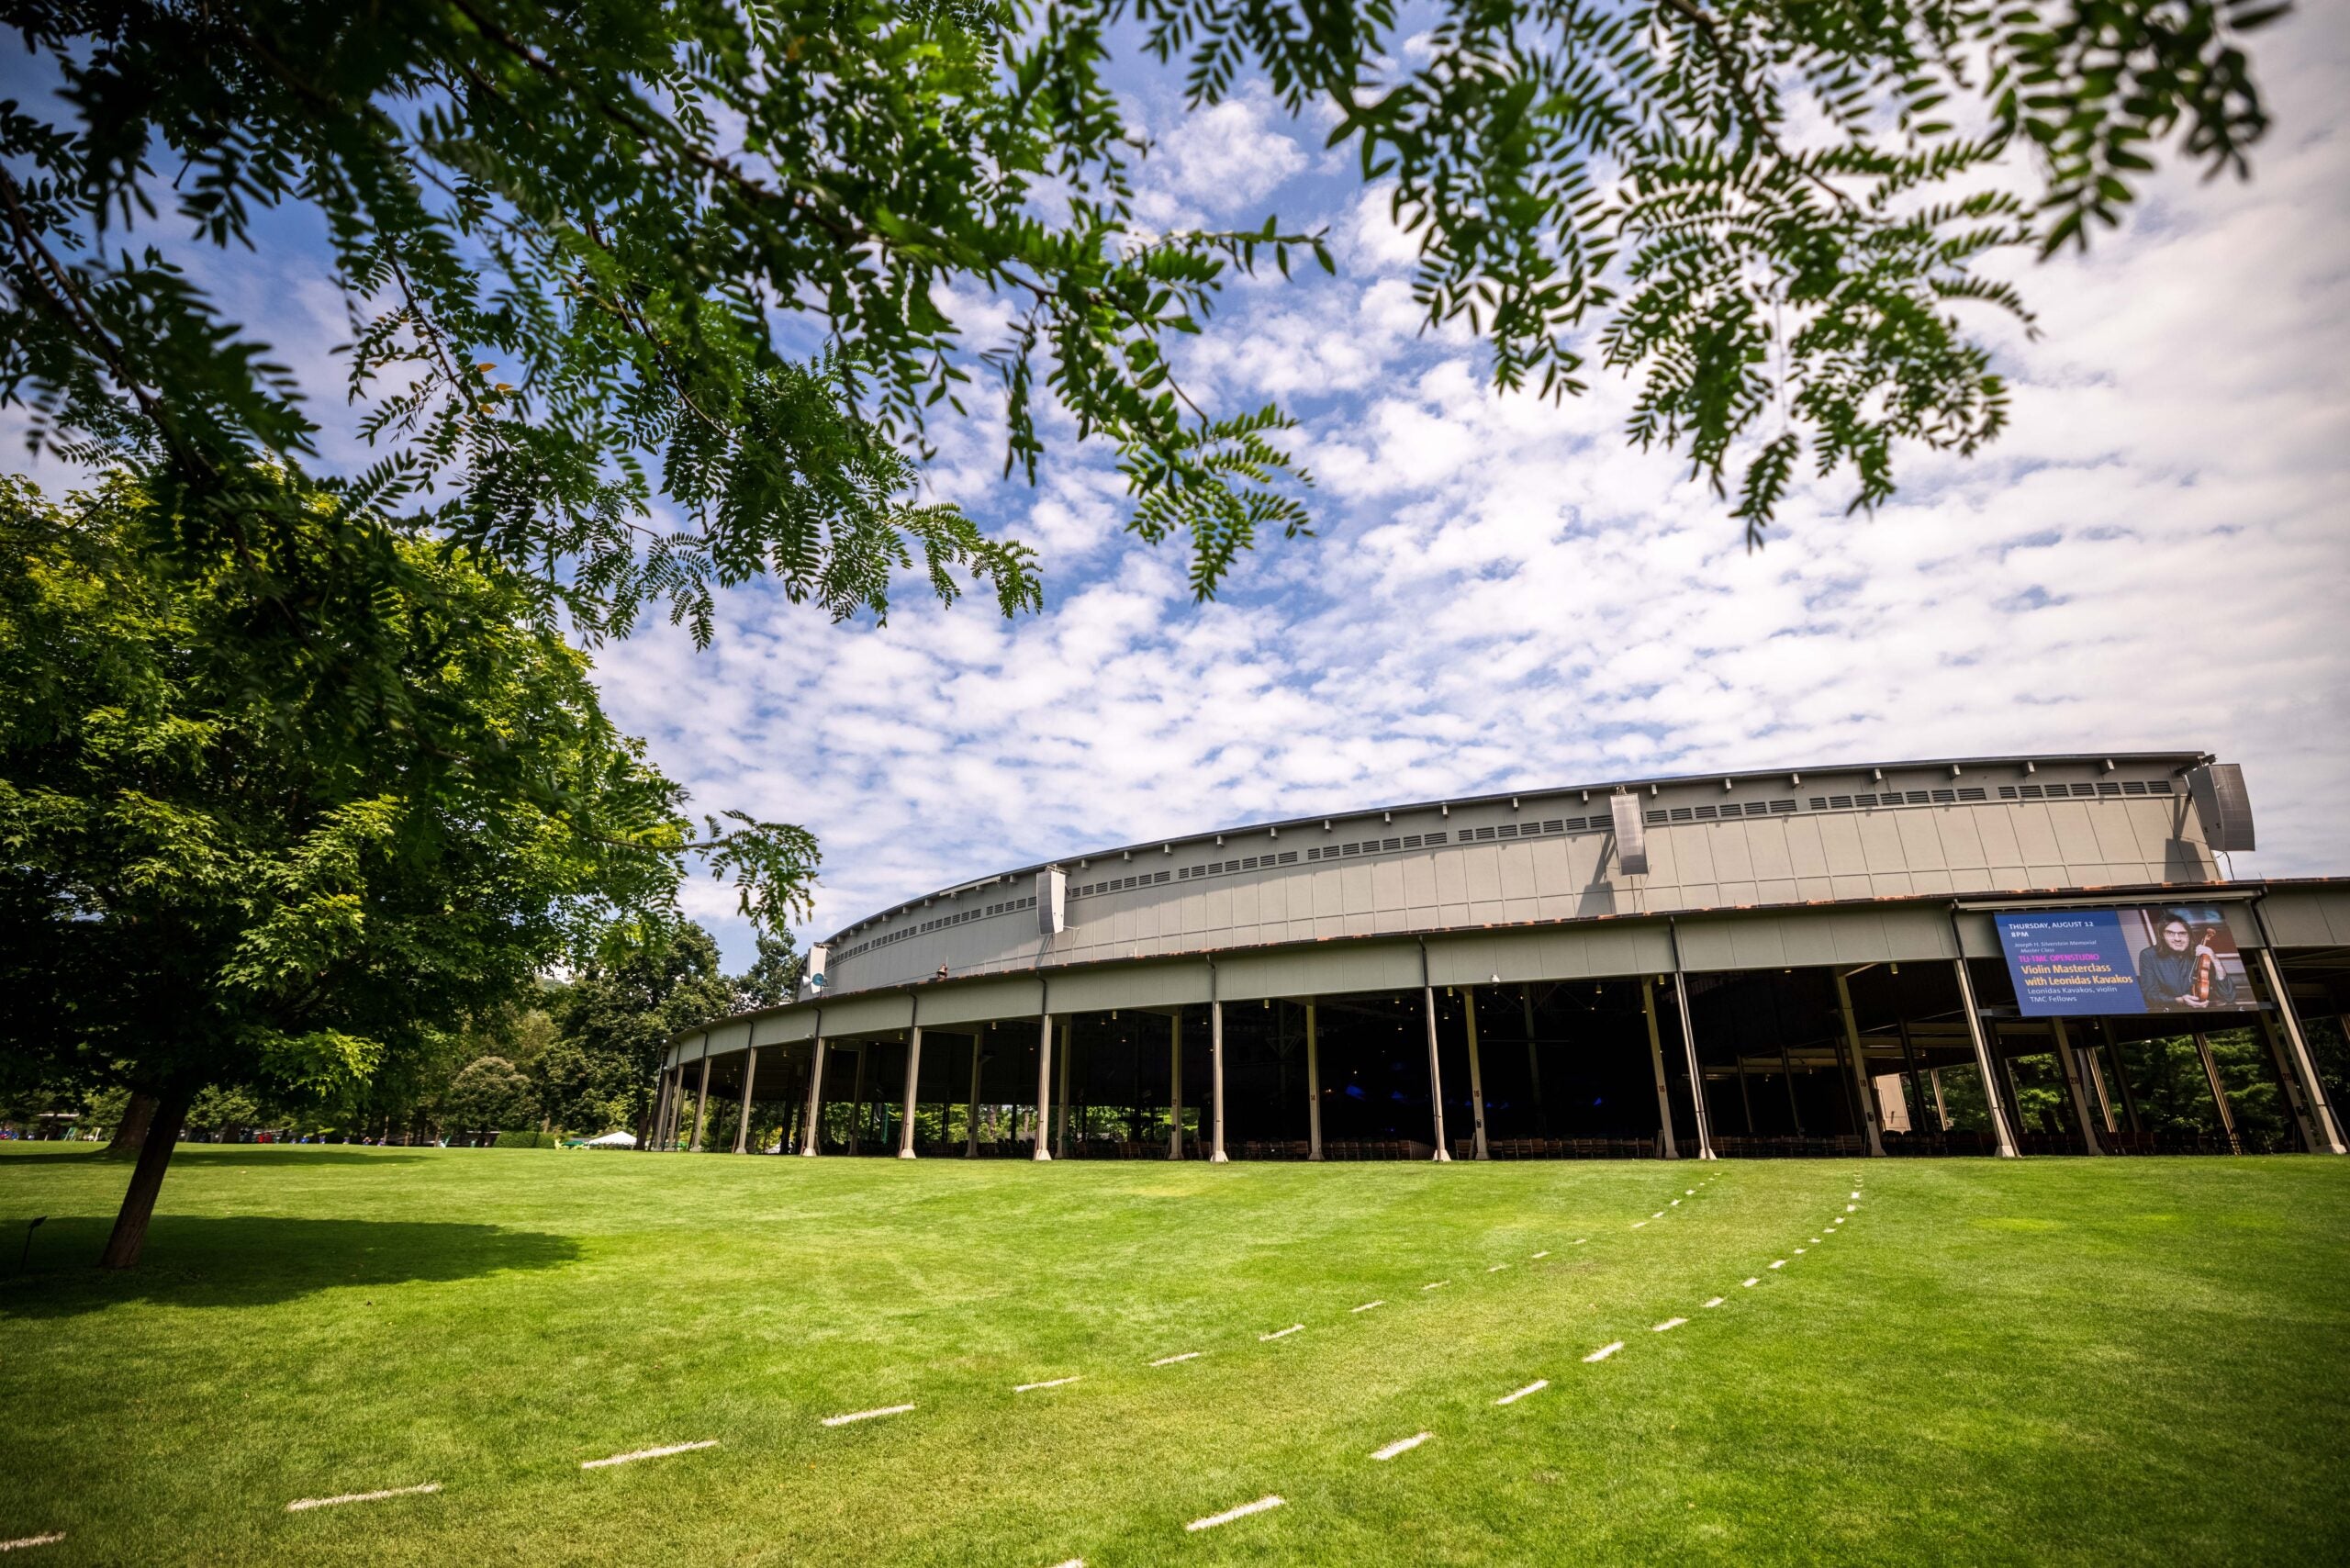 Tanglewood releases its 2022 lineup The Martha's Vineyard Guide